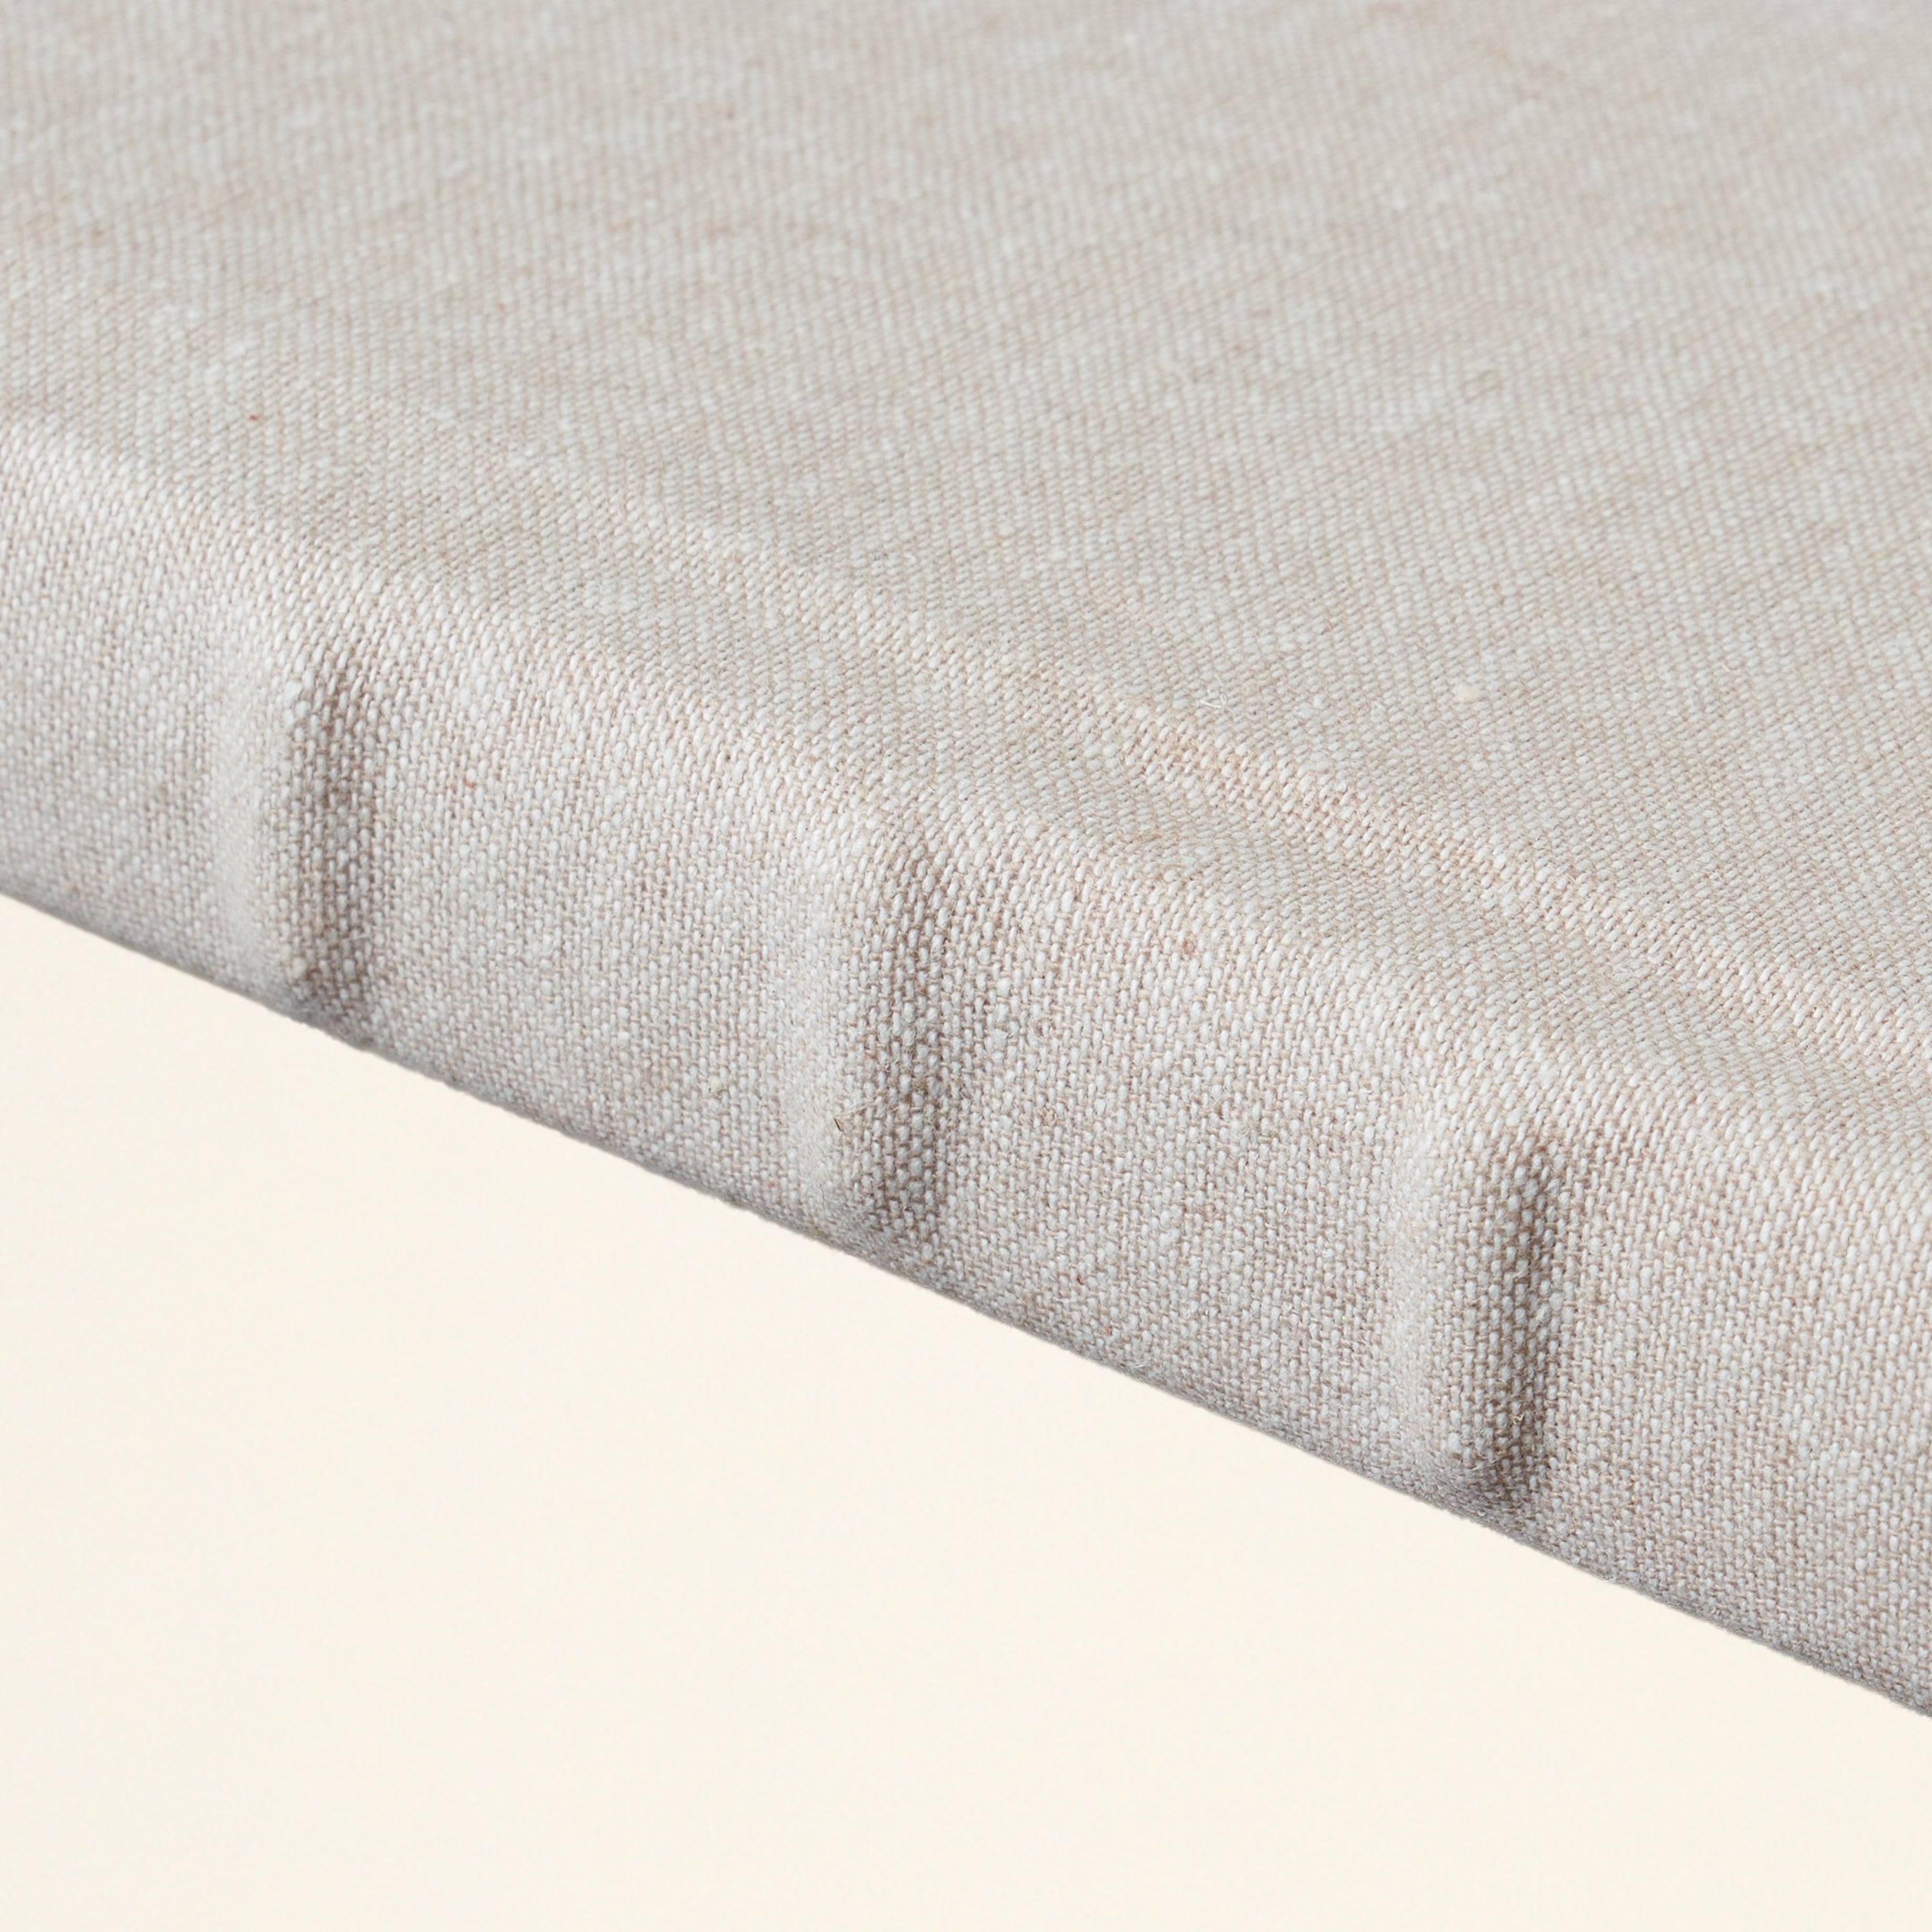 Linen Wrapped Books